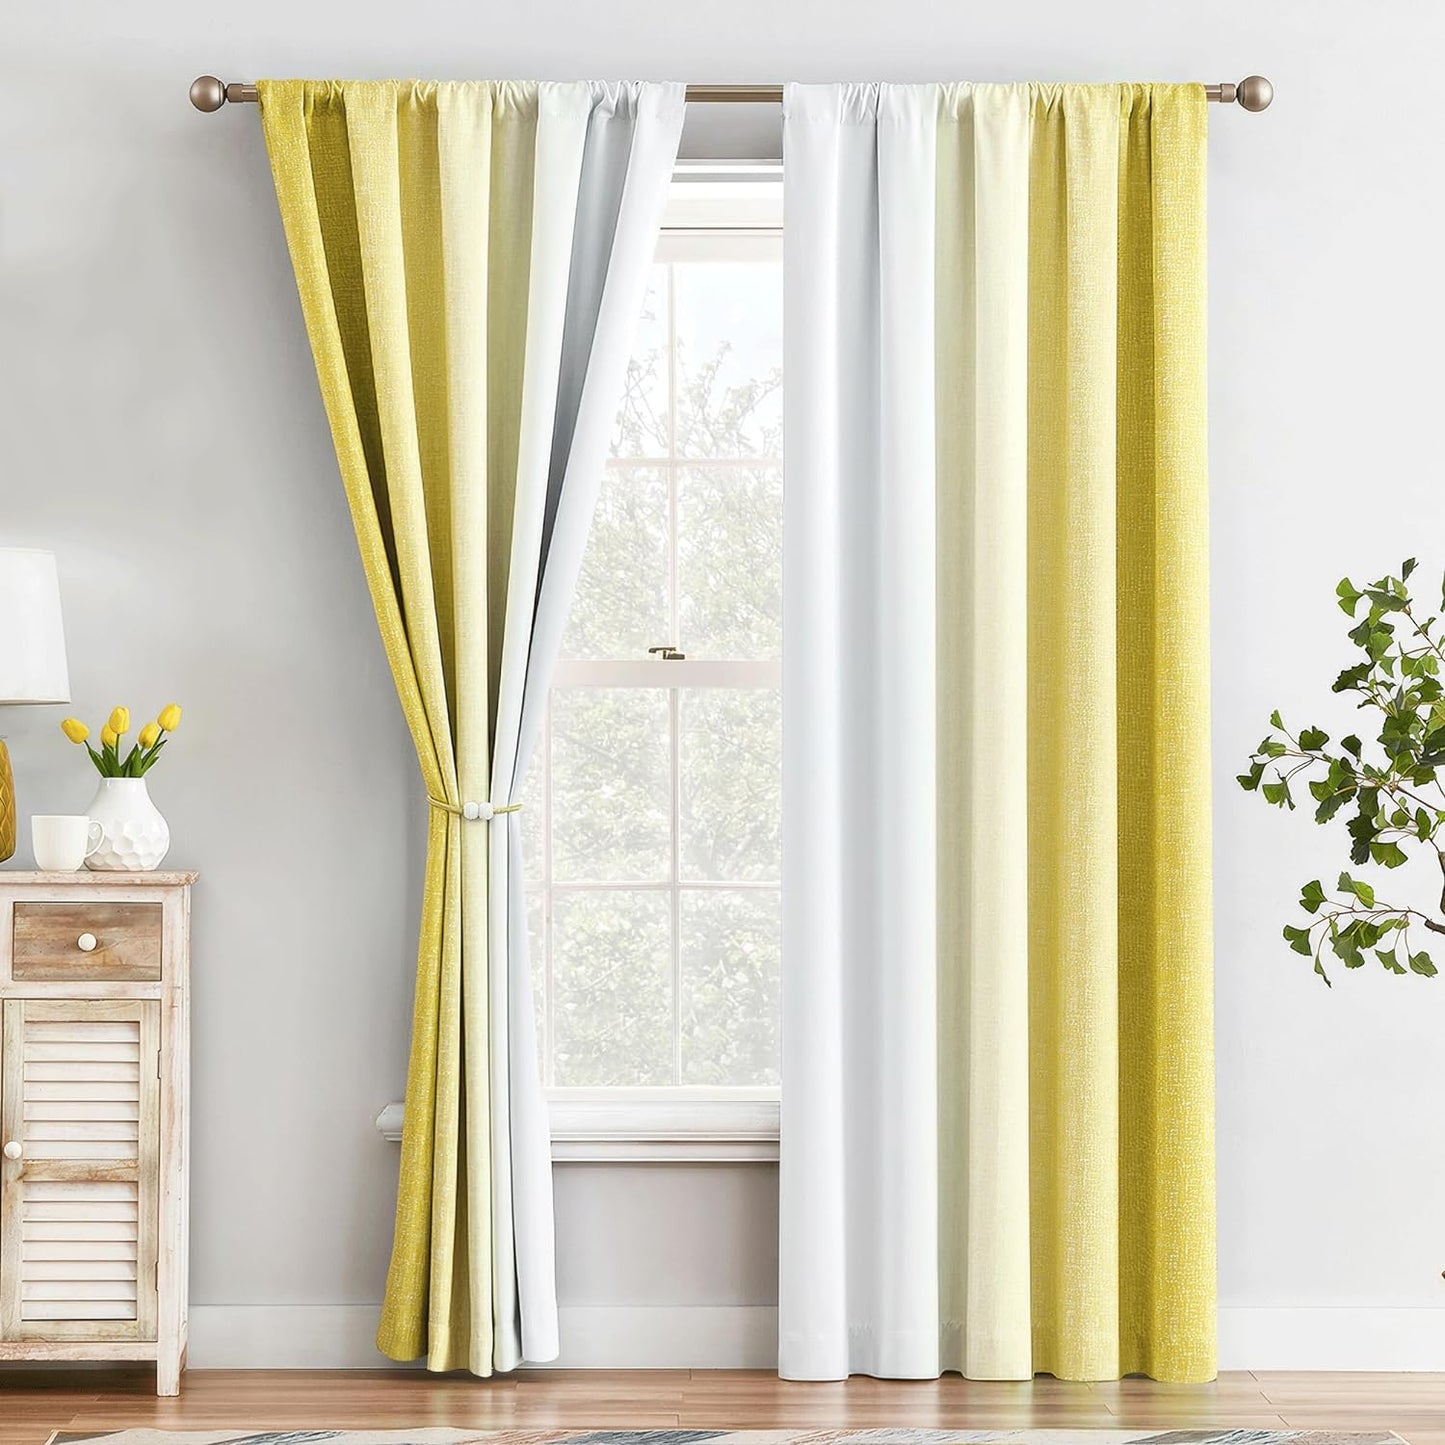 Geomoroccan Ombre 100% Blackout Curtains 84 Inches Long, Pink and White 2 Tone Reversible Window Treatments for Bedroom Living Room, Linen Gradient Print Rod Pocket Drapes 52" W 2 Panel Sets  Geomoroccan Yellow 52"X95"X2 